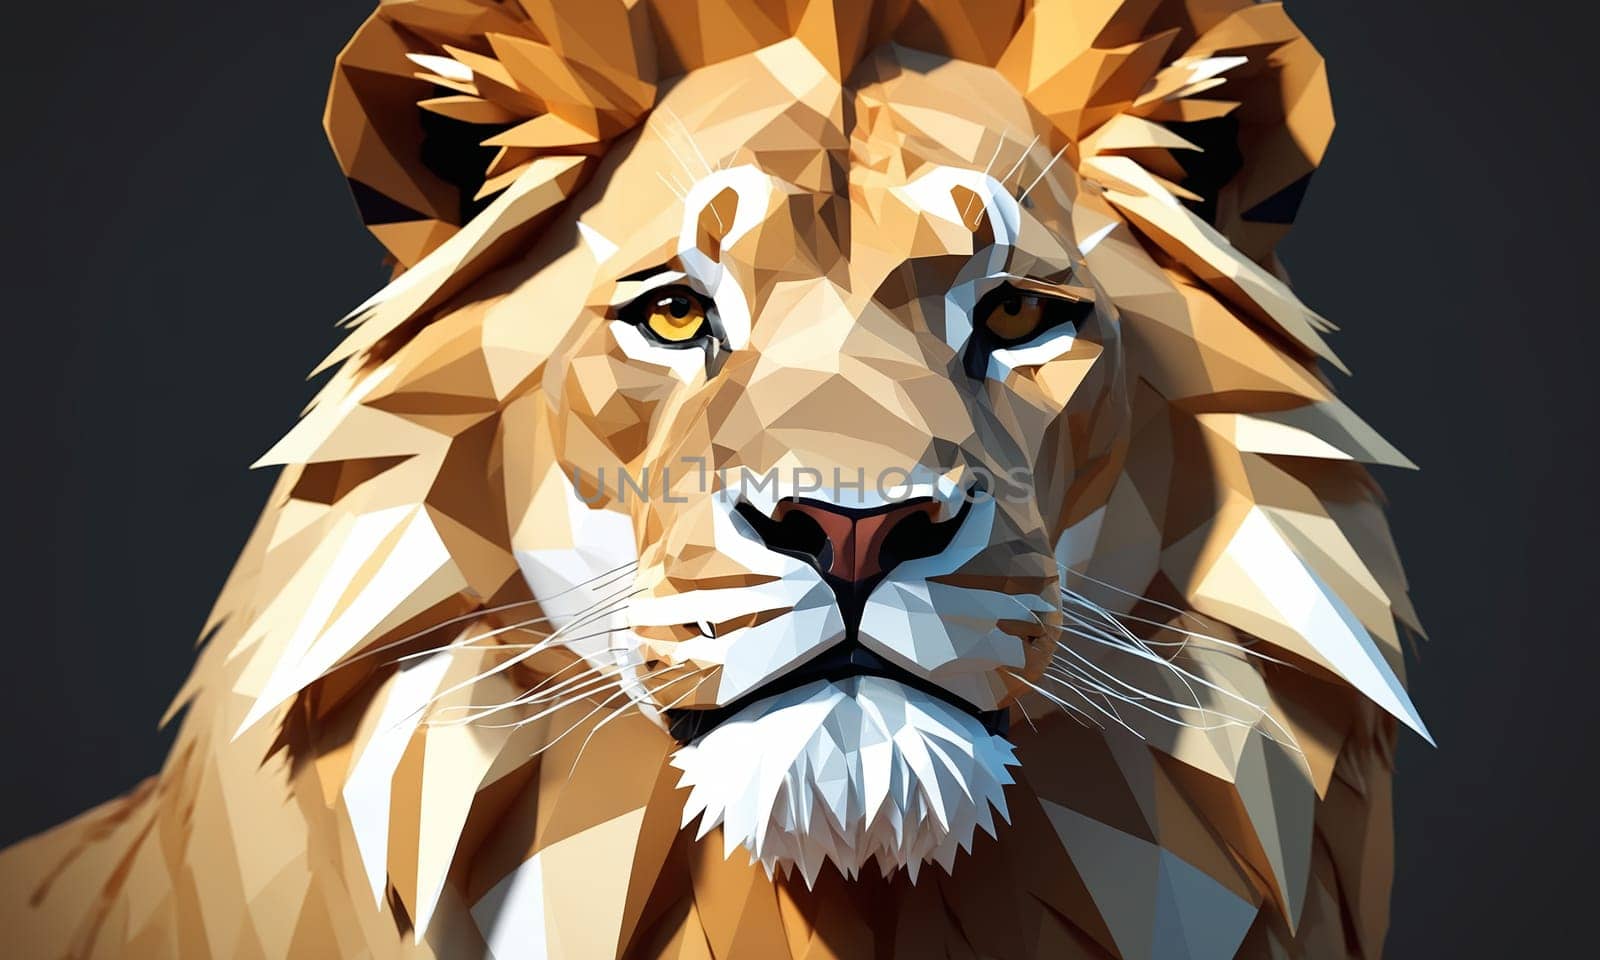 Low poly art of a Felidae lion with whiskers on gray background by Andre1ns